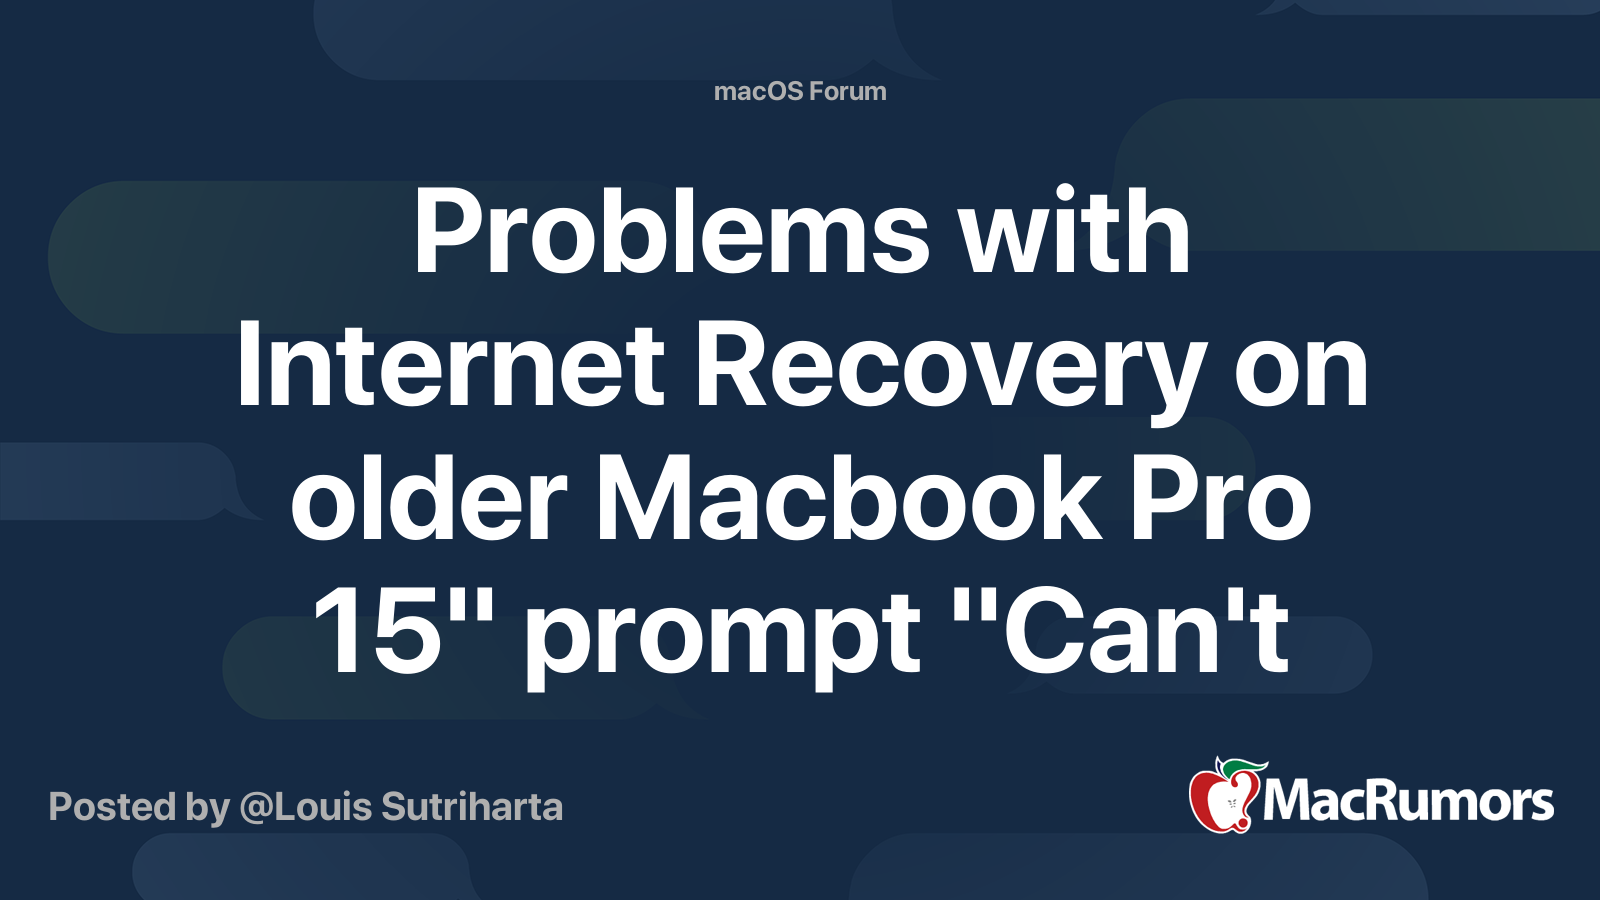 mac internet recovery cant download additional components